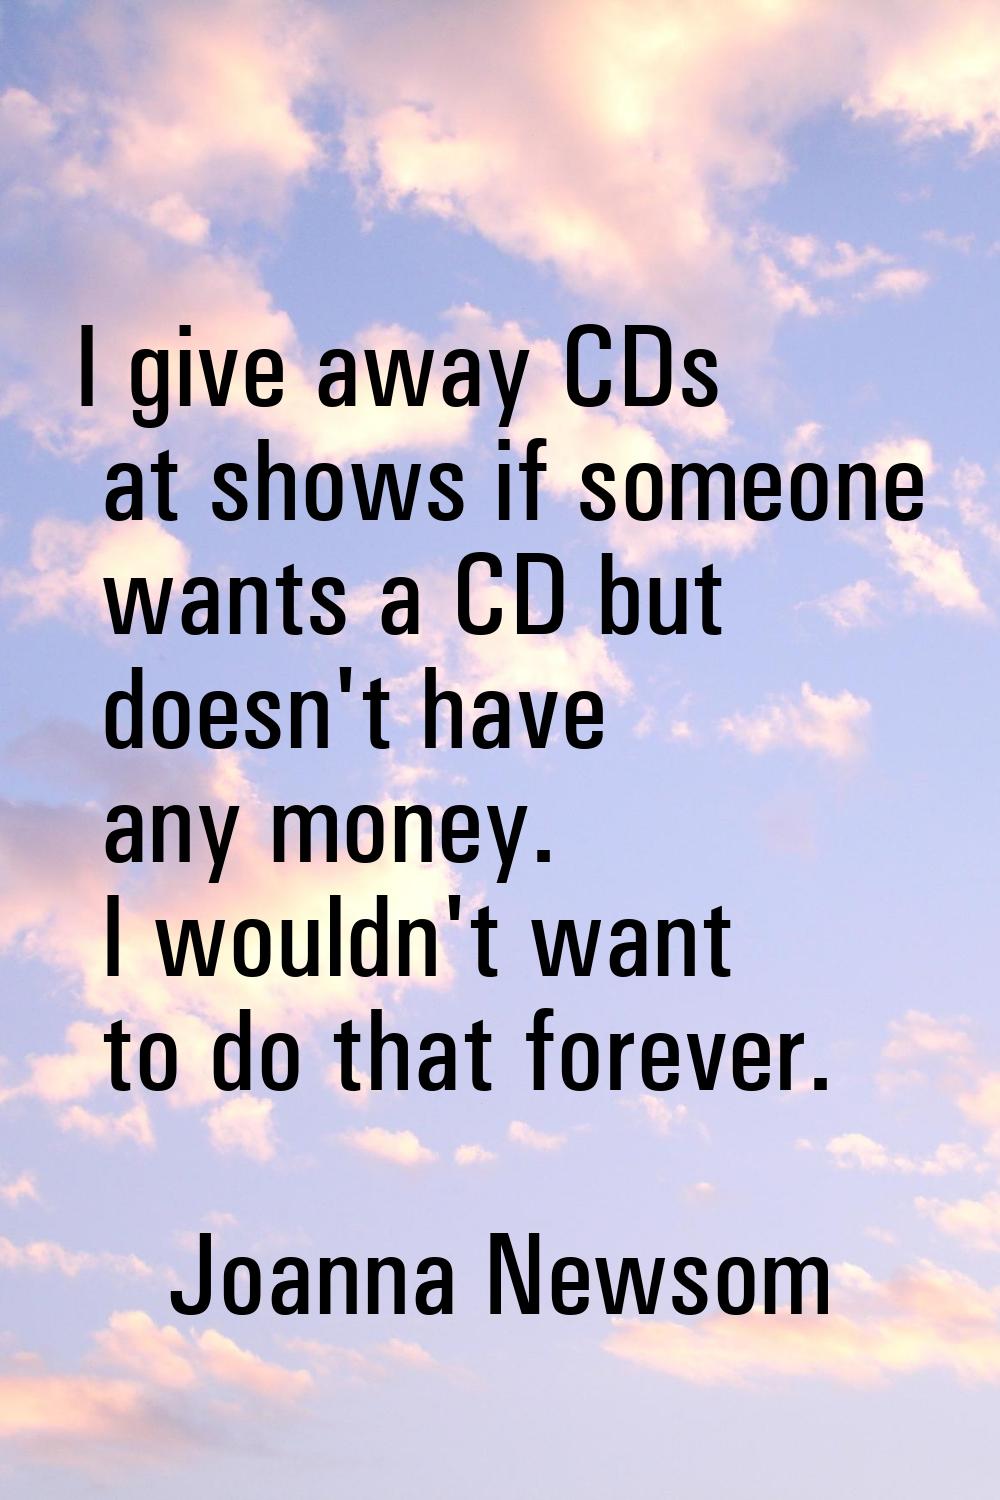 I give away CDs at shows if someone wants a CD but doesn't have any money. I wouldn't want to do th